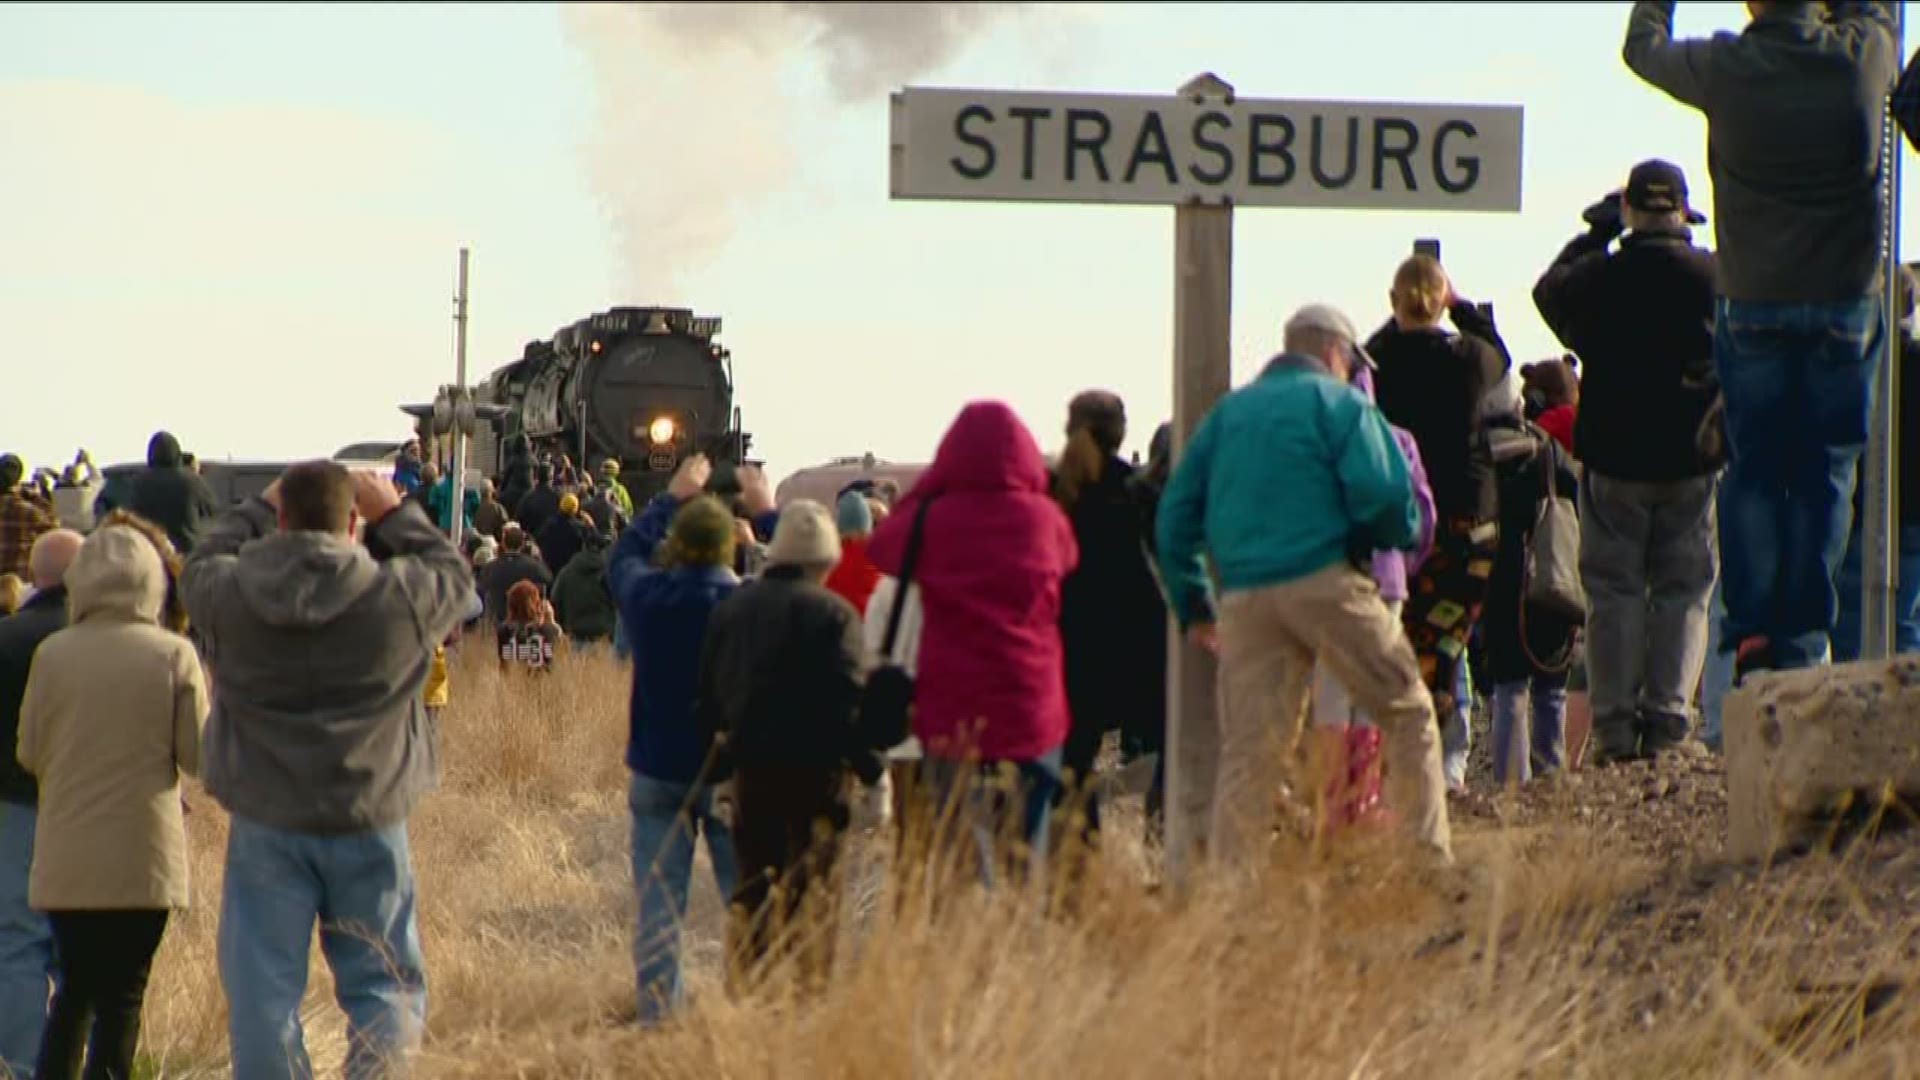 This year, the historic steam locomotive has been touring the Union Pacific system to celebrate the transcontinental railroad's 150th anniversary.